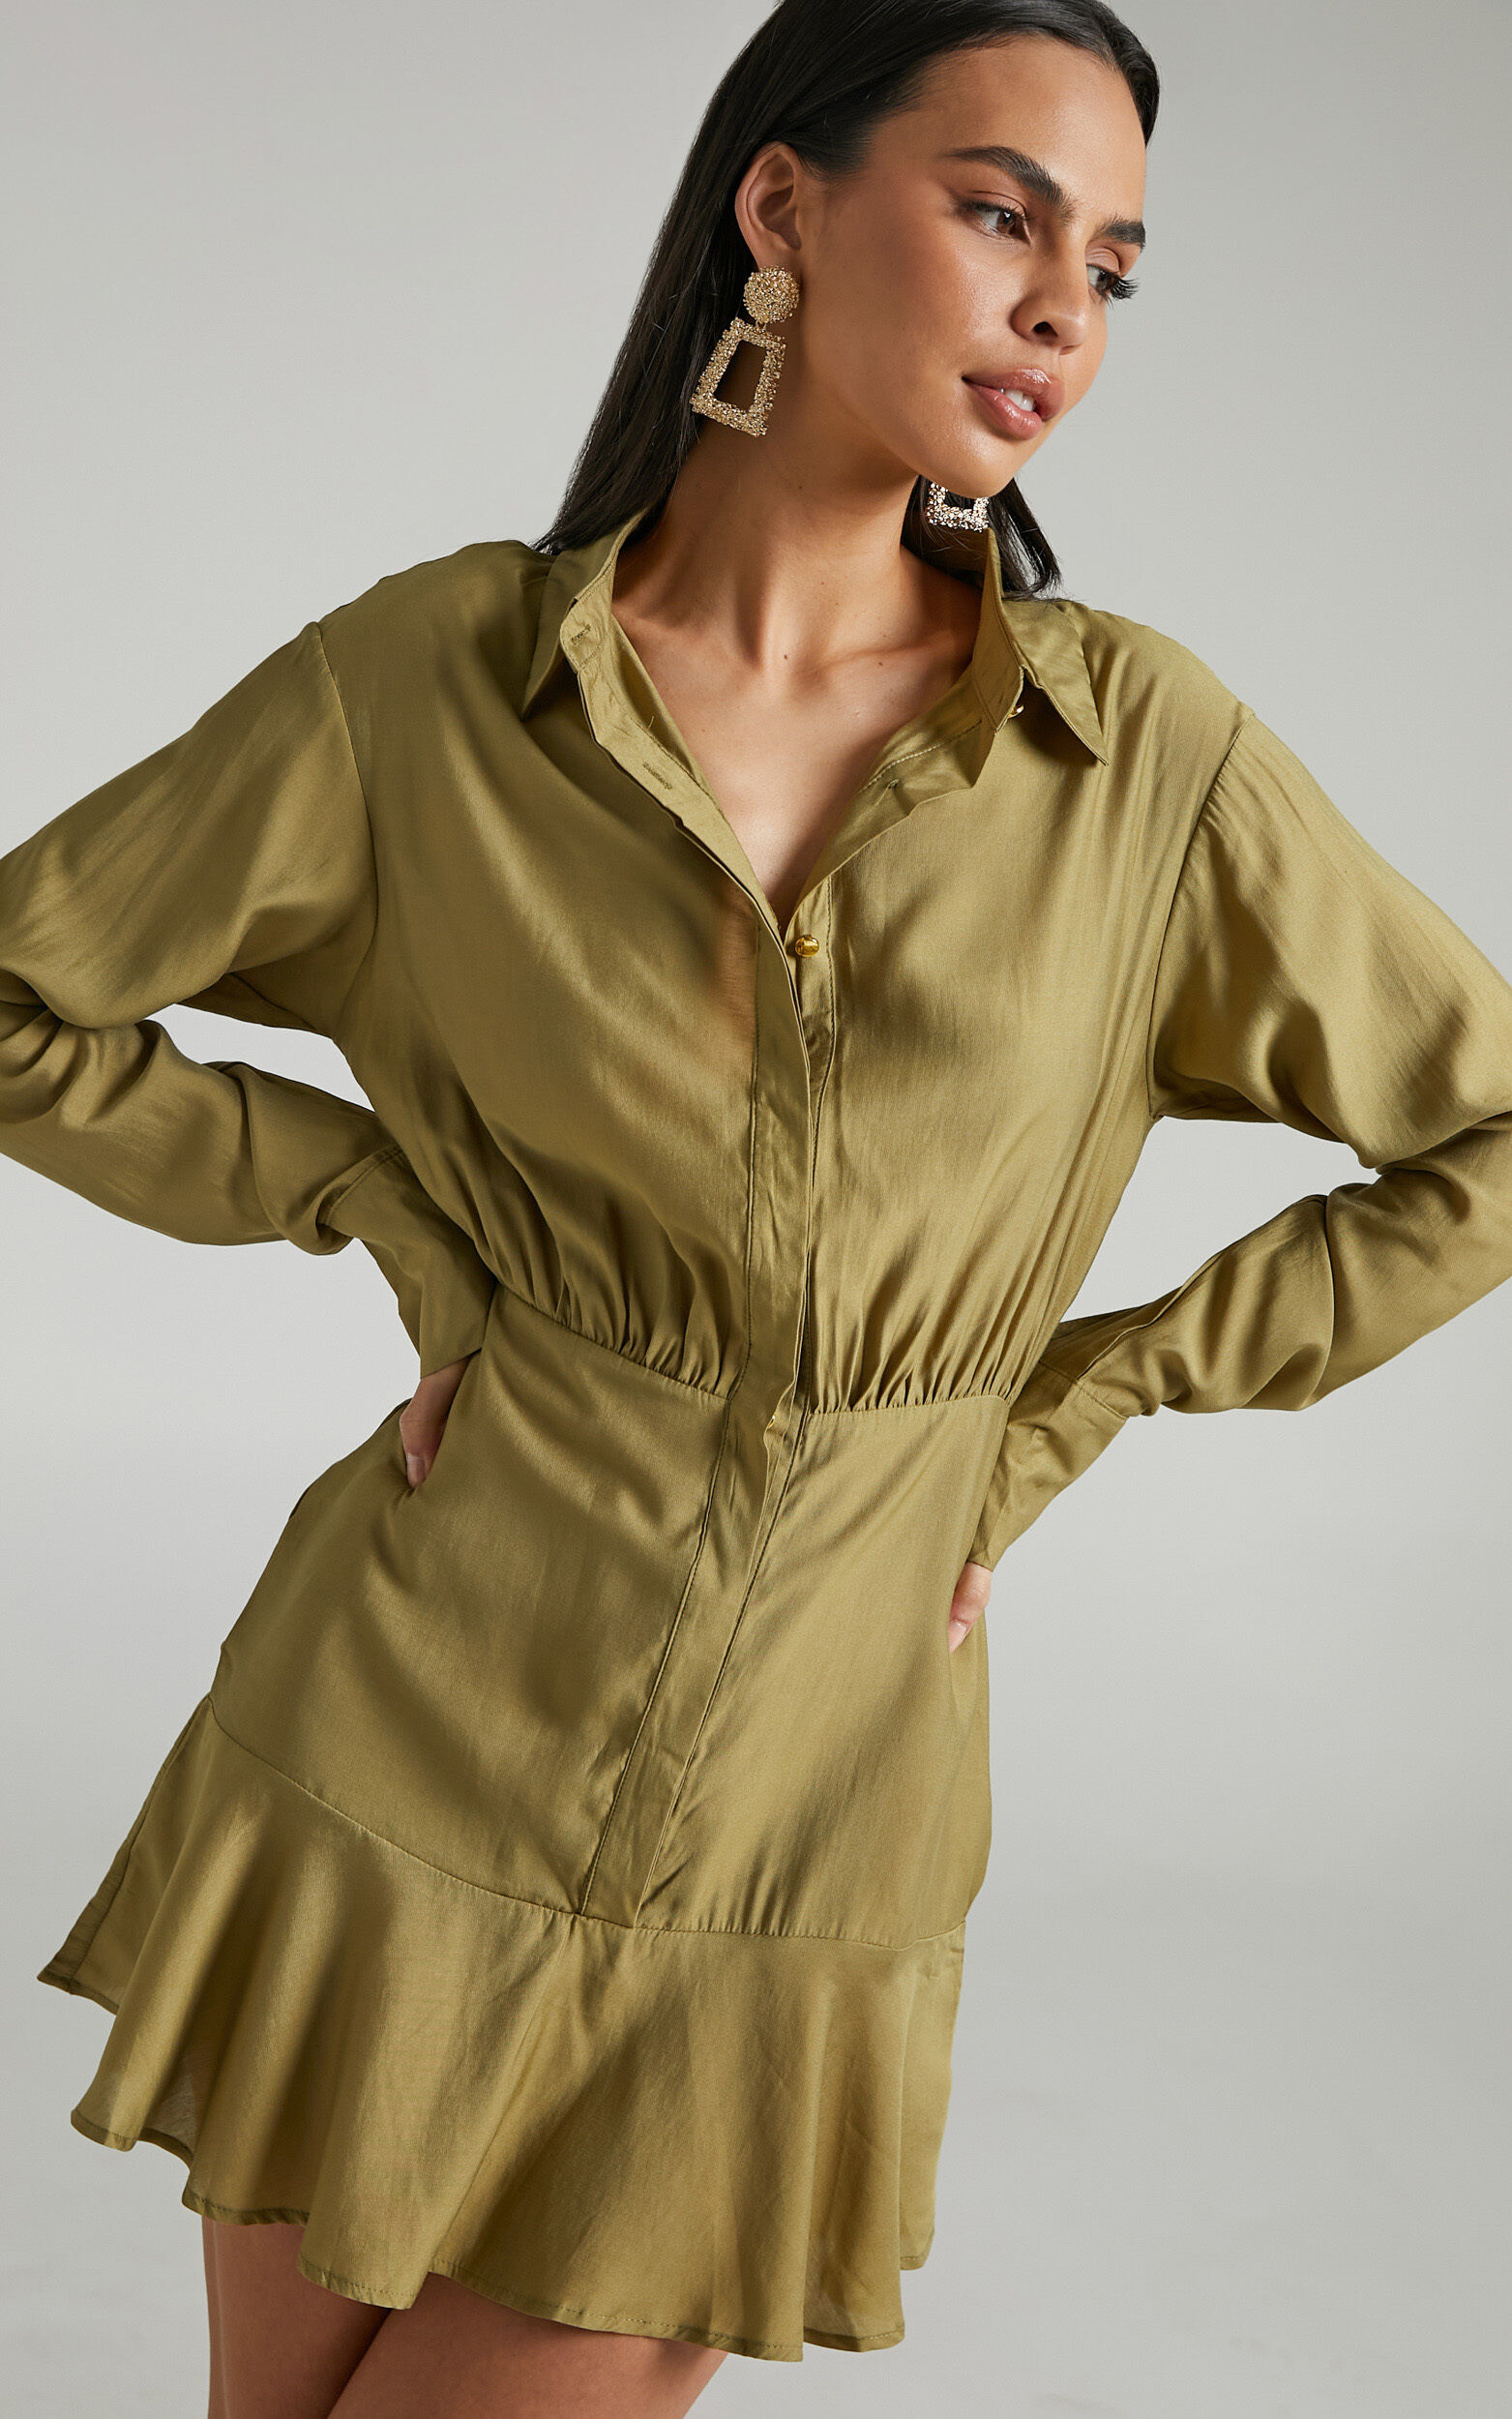 Jervin Collared Button Down Mini Shirt Dress in Khaki - 04, GRN1, super-hi-res image number null